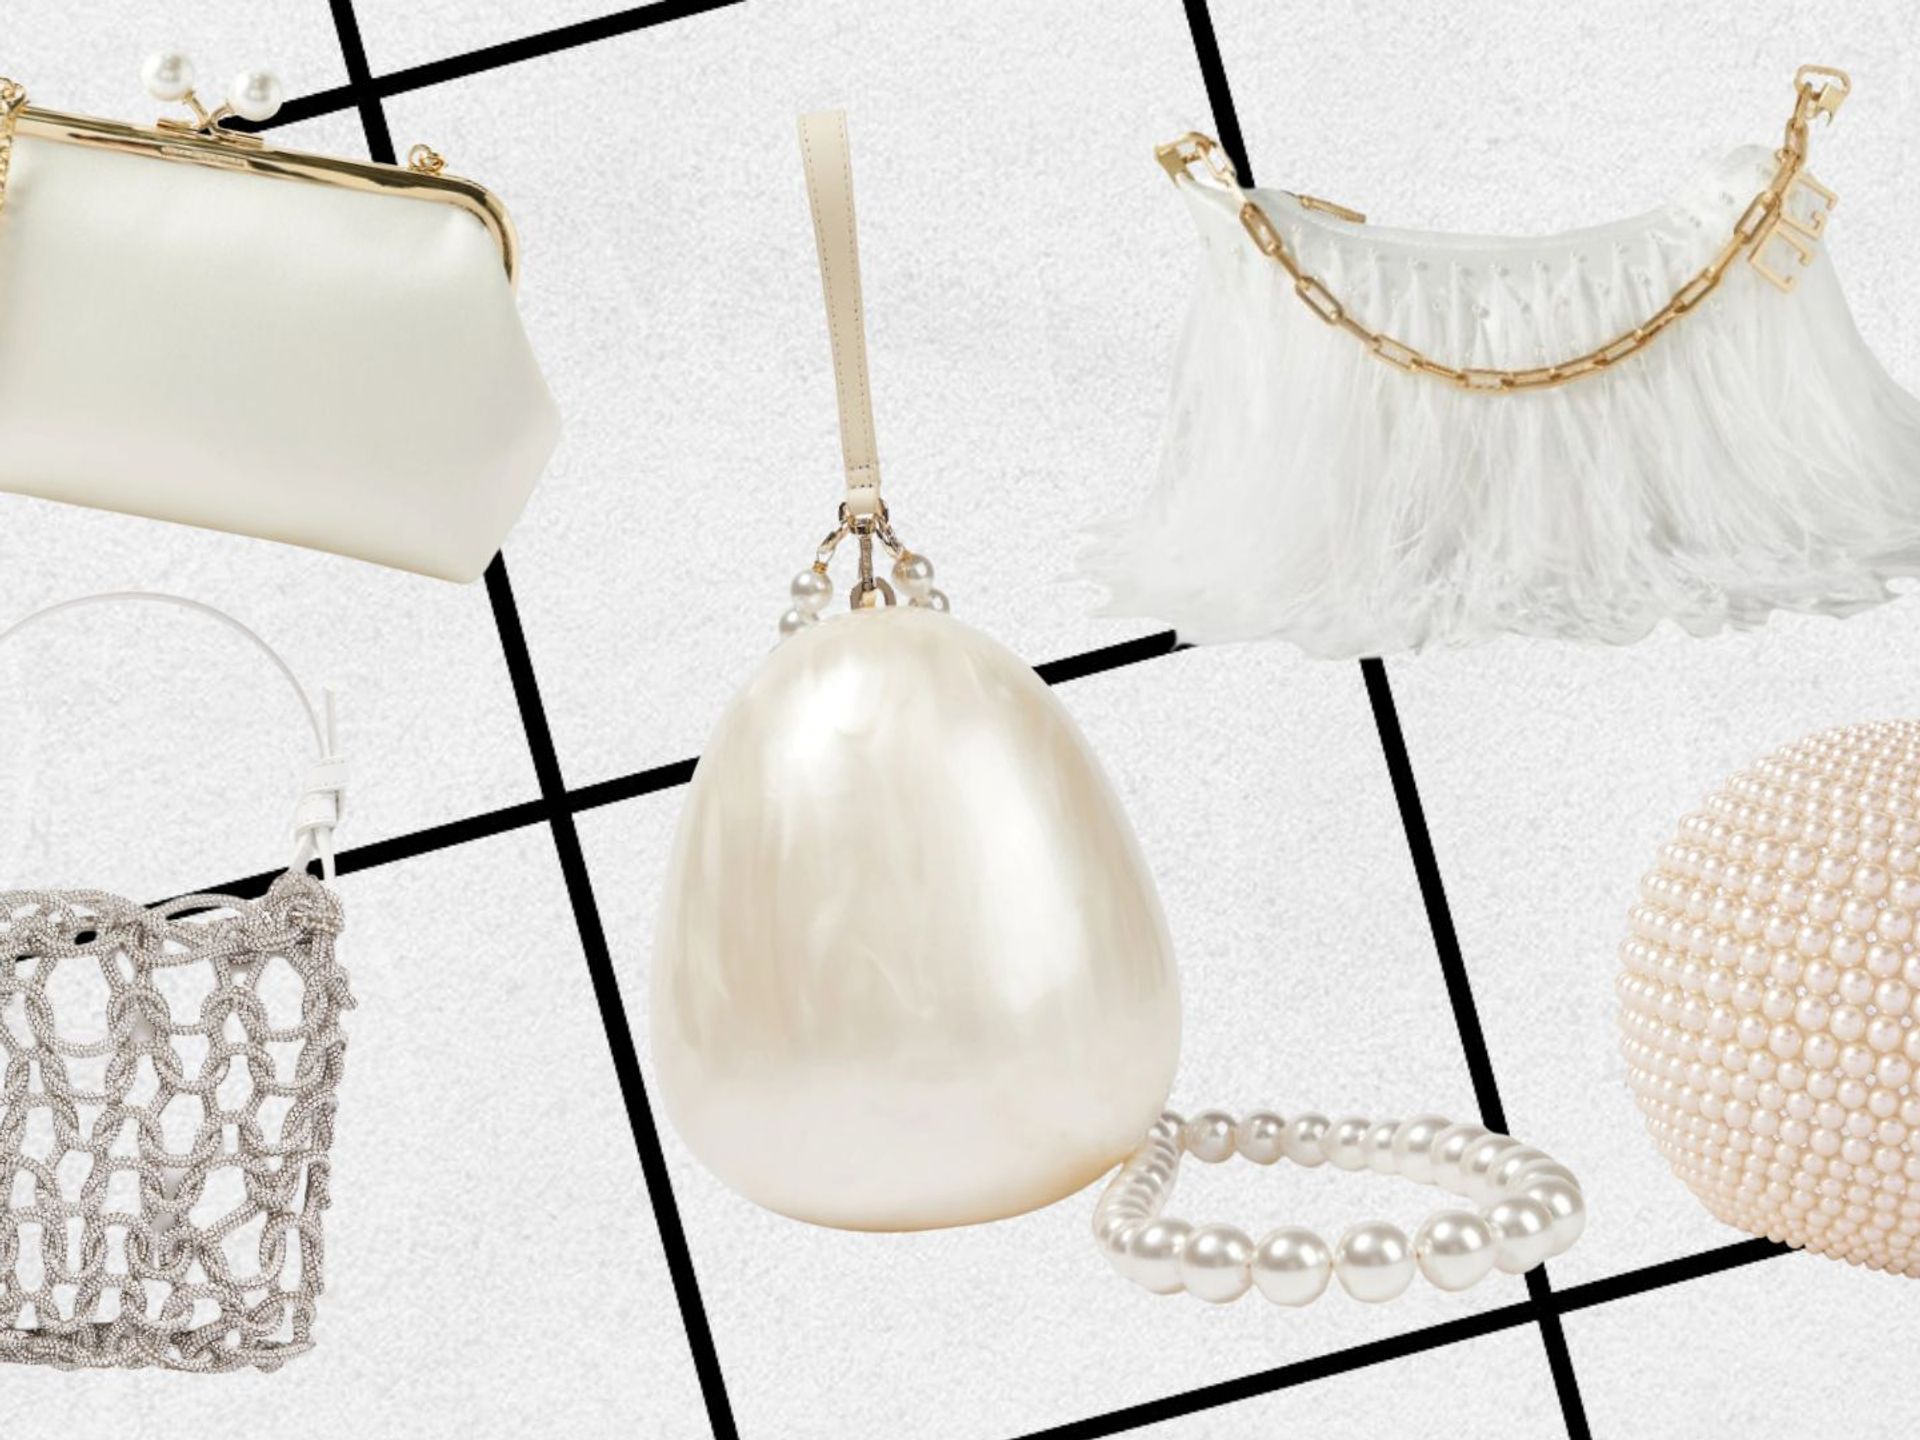 Clutch Bags for Weddings | a Trend of the Season